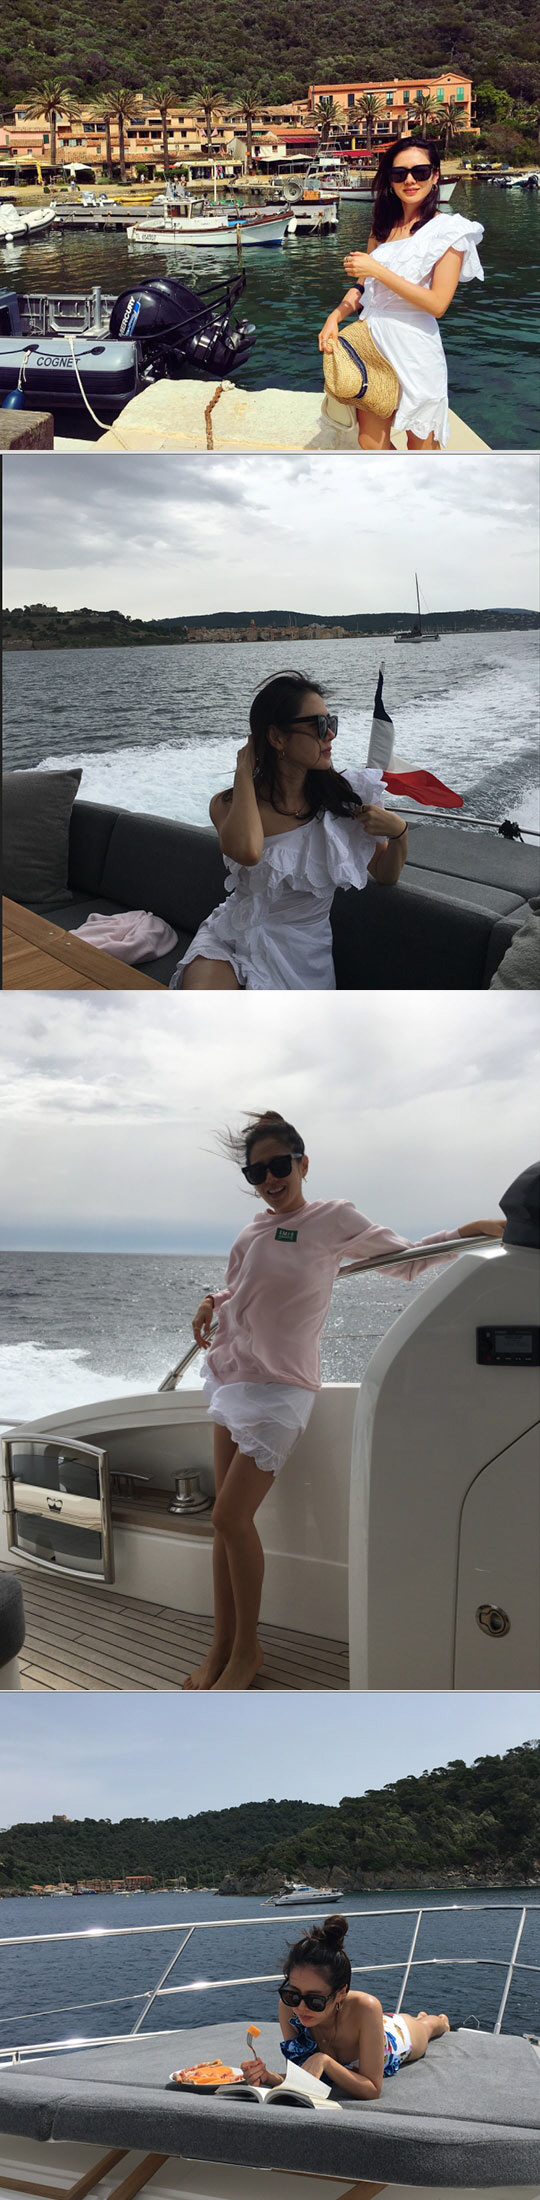 <p>On Saturday, Son Ye-jin gave a picture of his recent SNS update on the trip.</p><p>Son Ye-jin in the photograph showed spiritual sexy beauty with a white asymmetrical dress showing shoulder and clavicle, whether to fully enjoy the wind blowing on the boat with sporty attire. She flaunted her beautiful face against a backdrop of a small port like a picture, and fell on her boat in swimming suit and got her sensual appeal.</p><p>Son Ye-jin played a role of Yunjin in JTBC recently airing finished JTBC It is a beautiful older sister who often bought rice and received a great love</p>